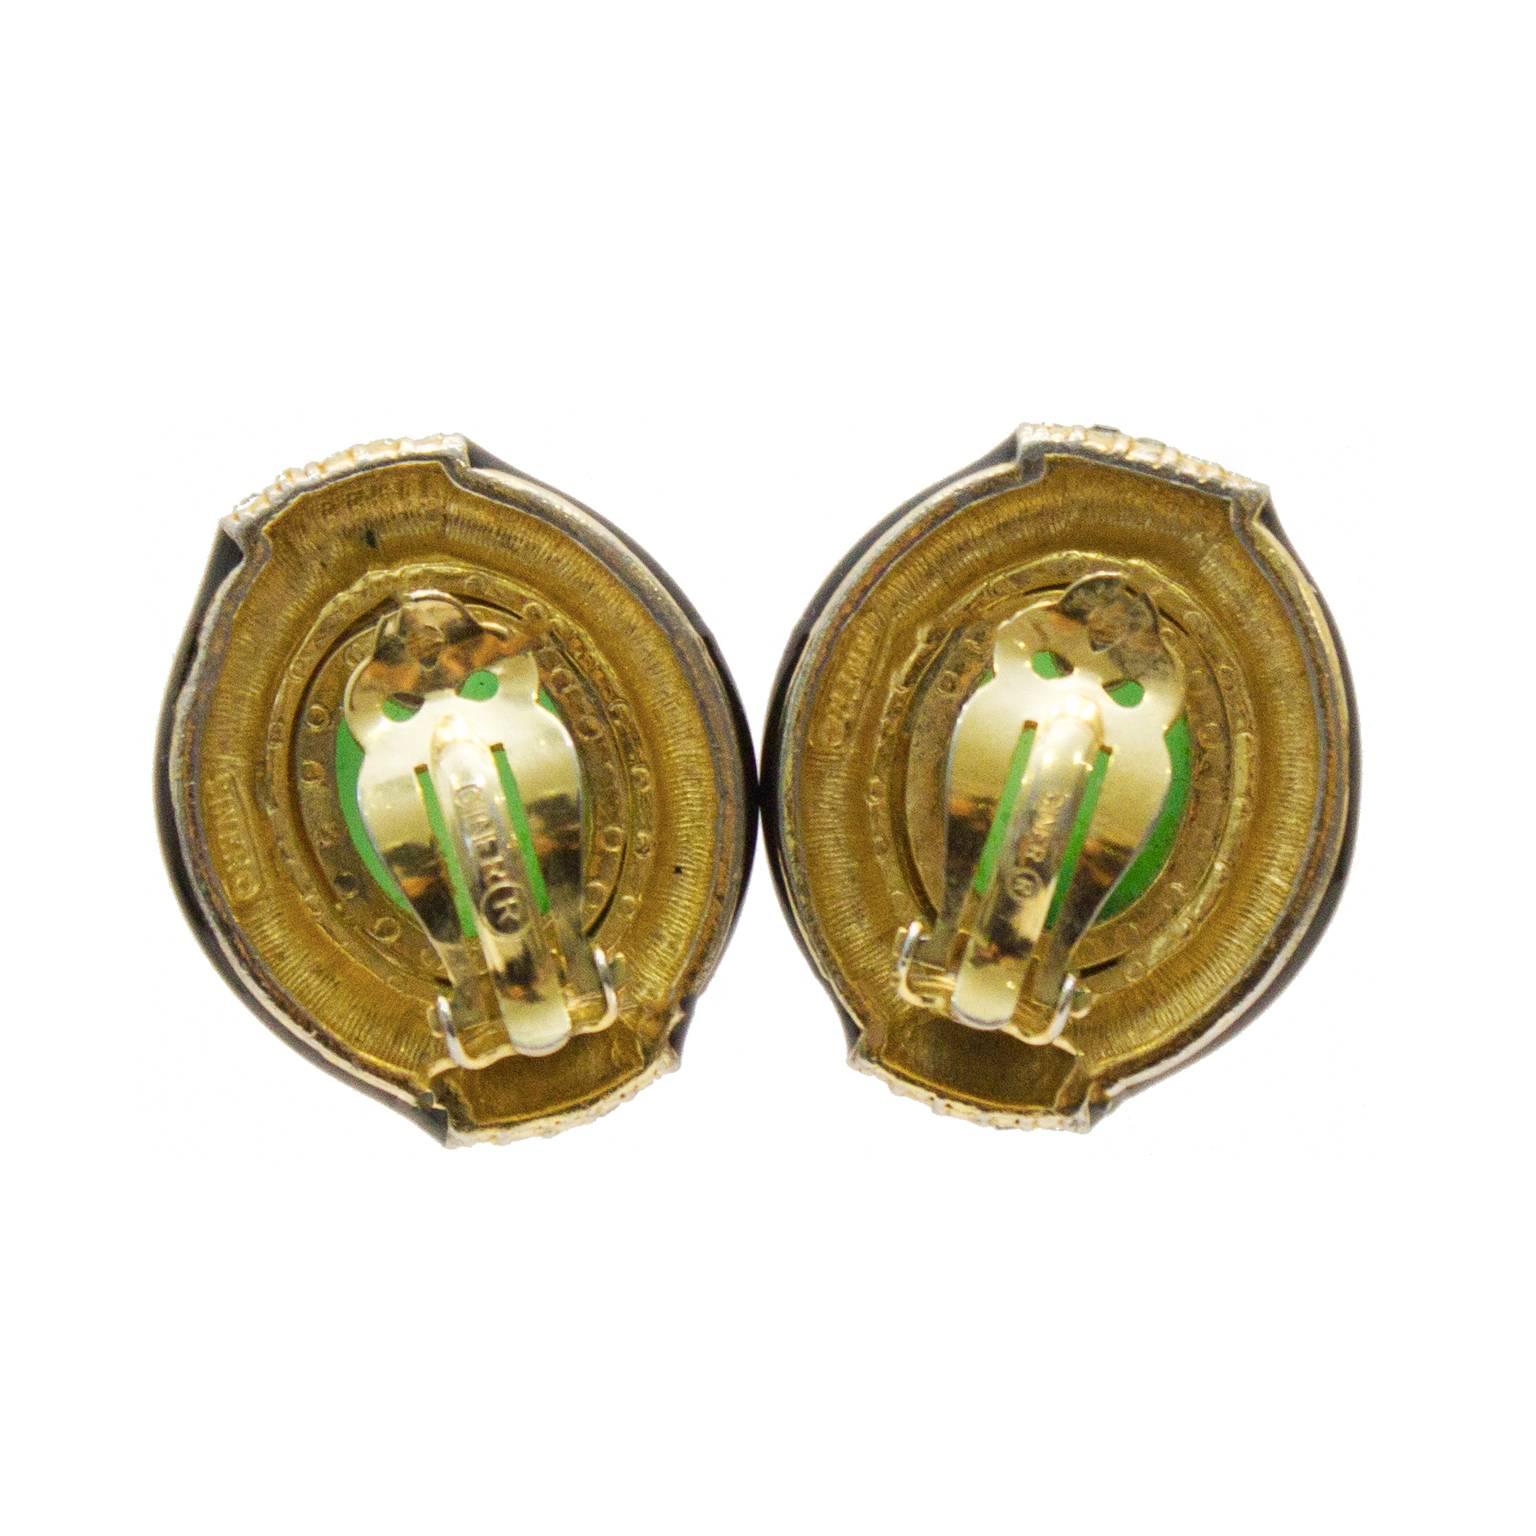 Ciner 1960's poured glass, enamel and rhinestone oval shaped earrings. The clip-on style earrings features a jade-like poured glass cabochon, set in a gold tone hardware, surrounded by a smooth black enamel border with rhinestone encrusted detail.